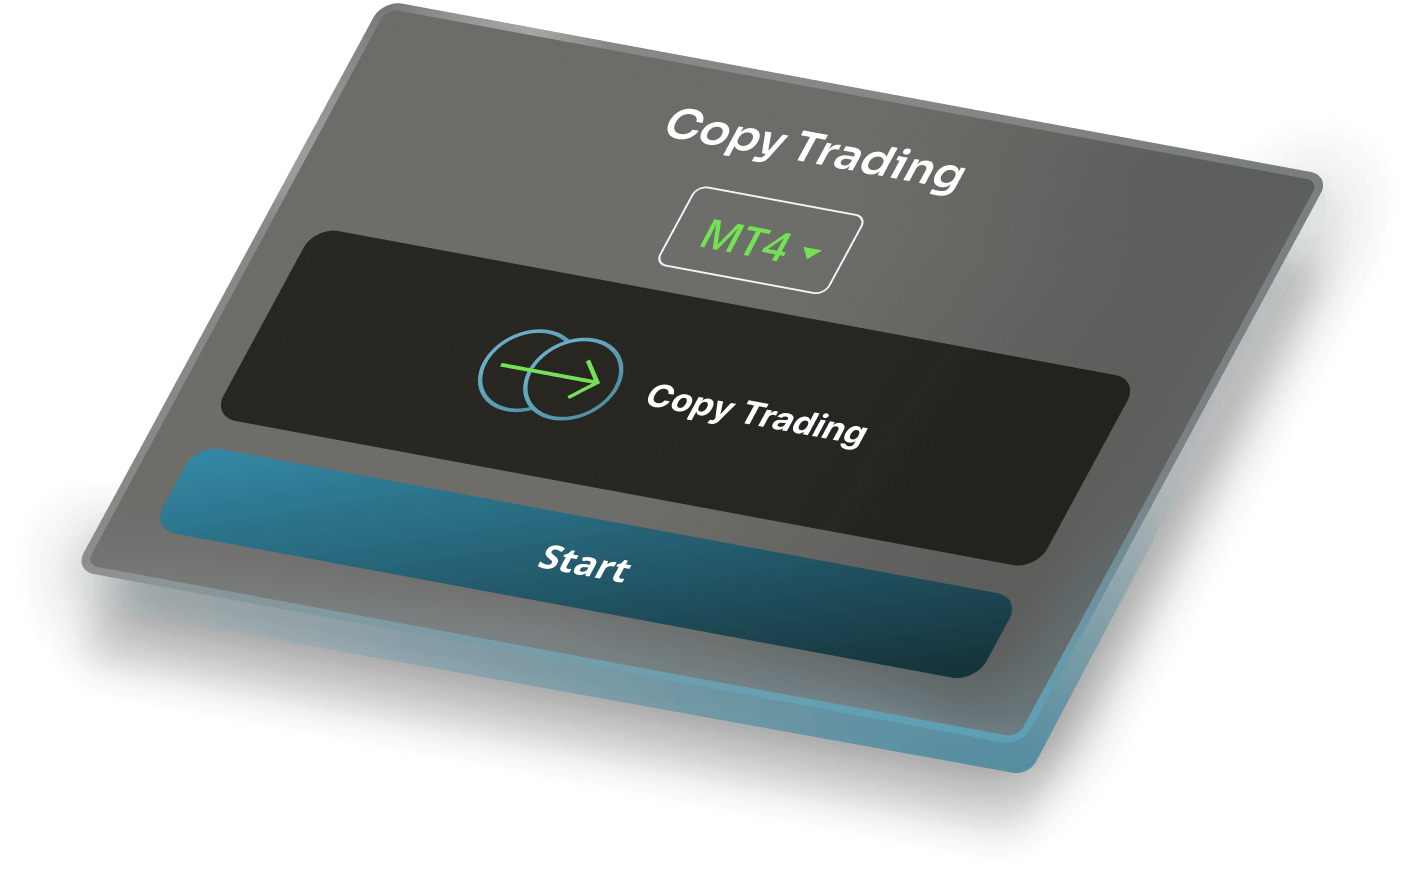 Go to the Copy Trading Section